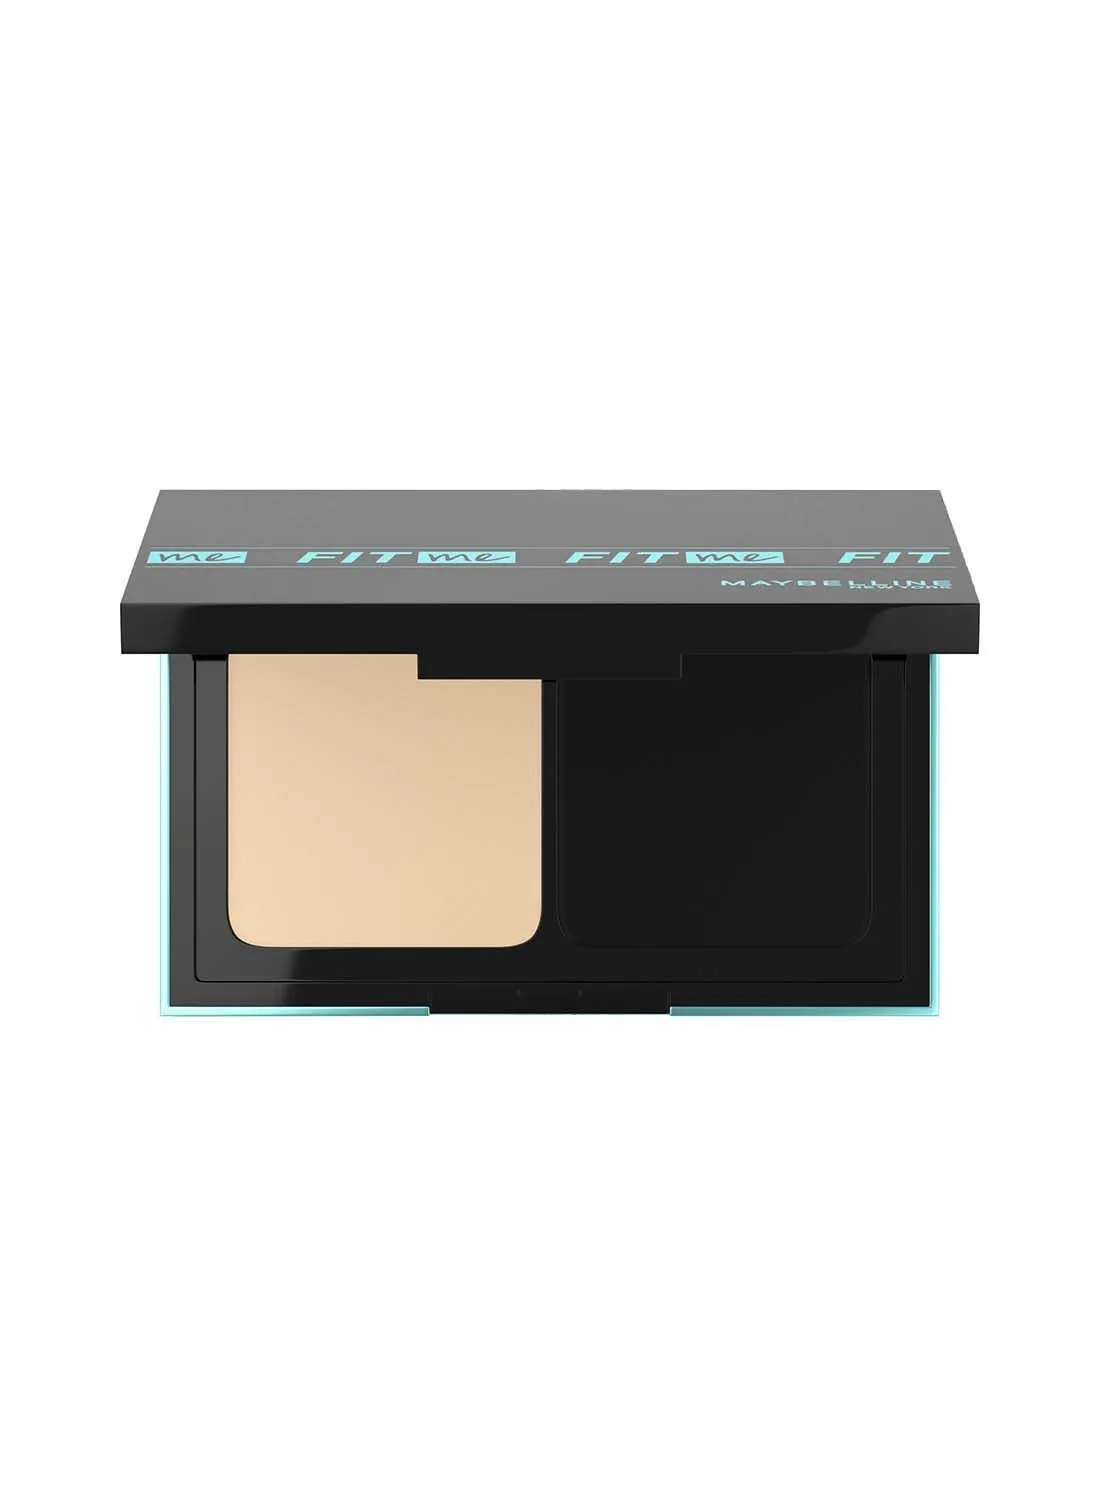 MAYBELLINE NEW YORK Maybelline New York, Fit Me foundation in a powder 118 Light Beige